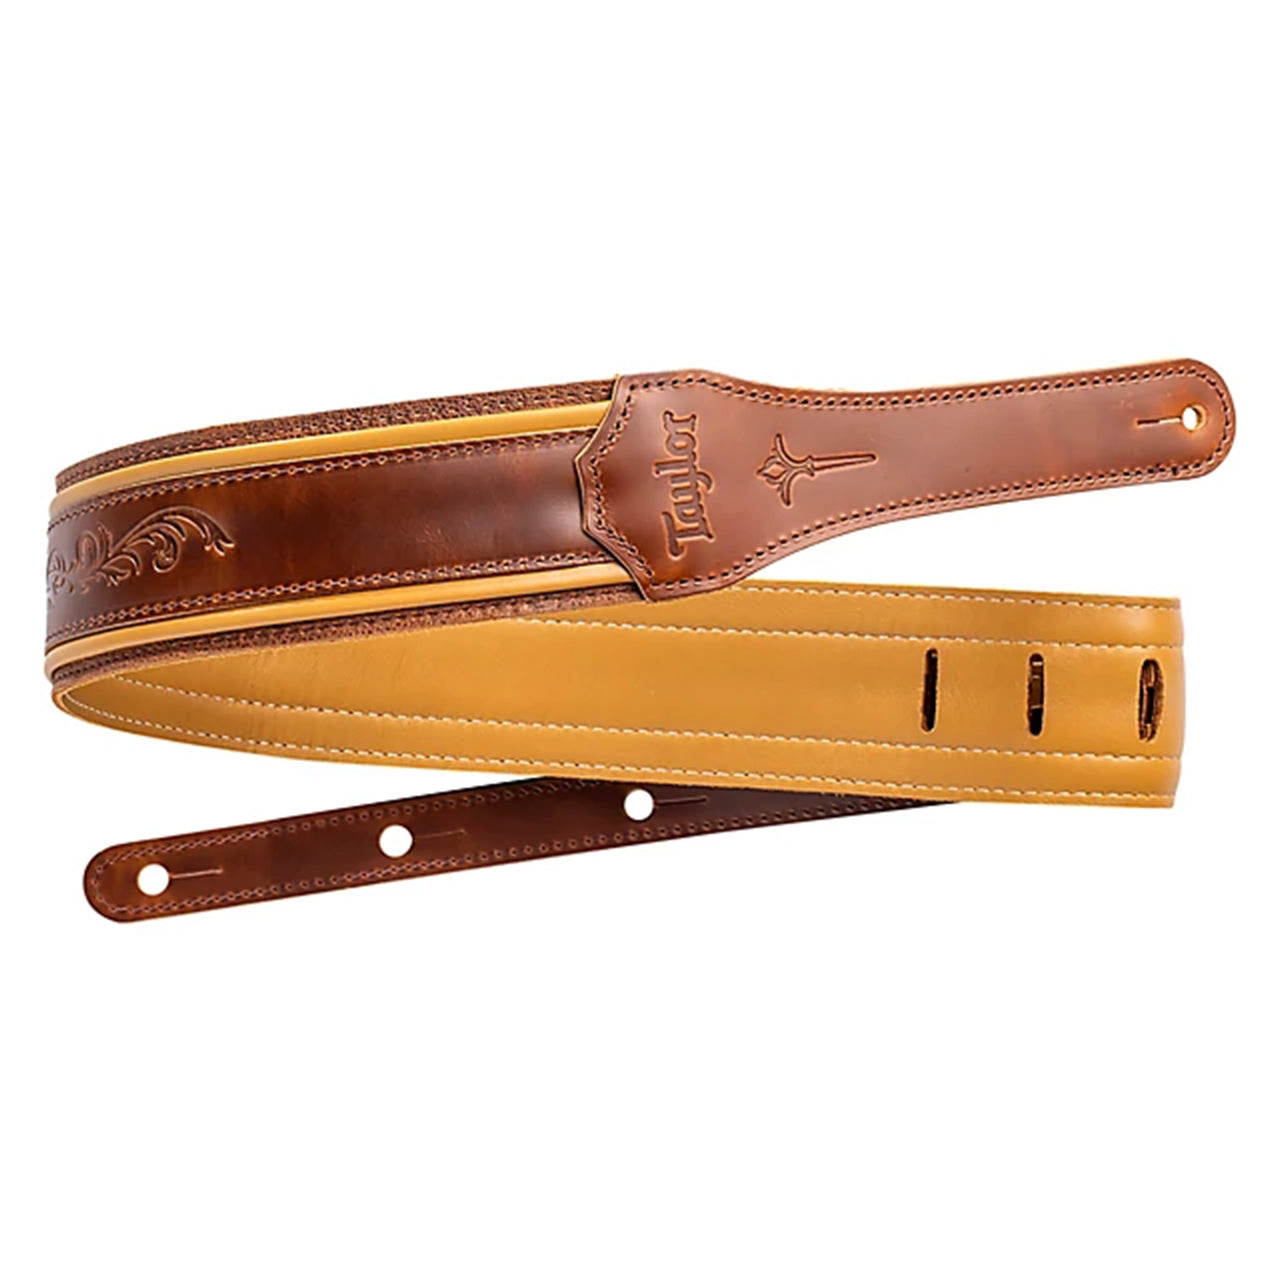 Taylor Nouveau 2.5" Embroidered Leather Guitar Strap, Distressed Brown